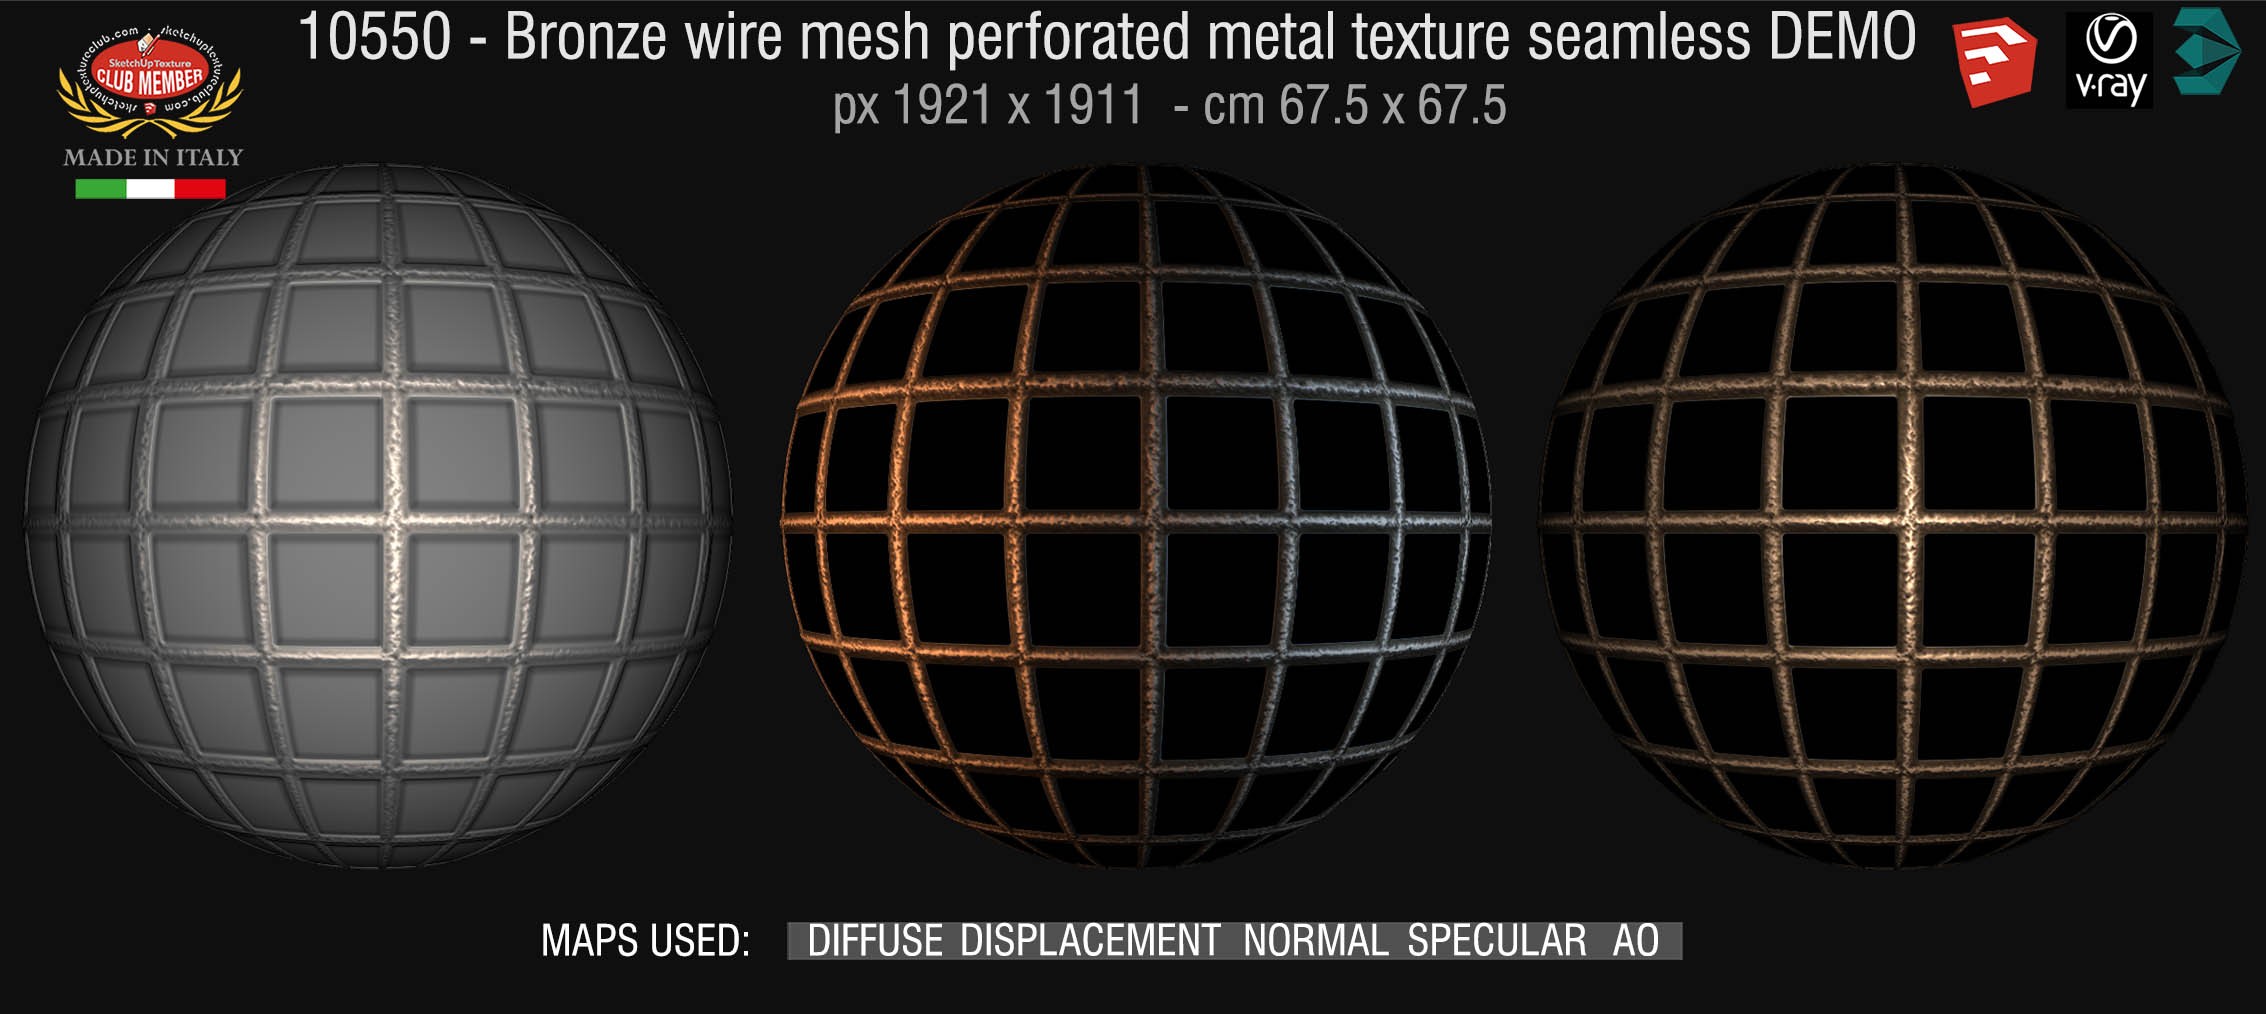 10550 HR Bronze wire mesh perforate metal texture seamless + maps DEMO